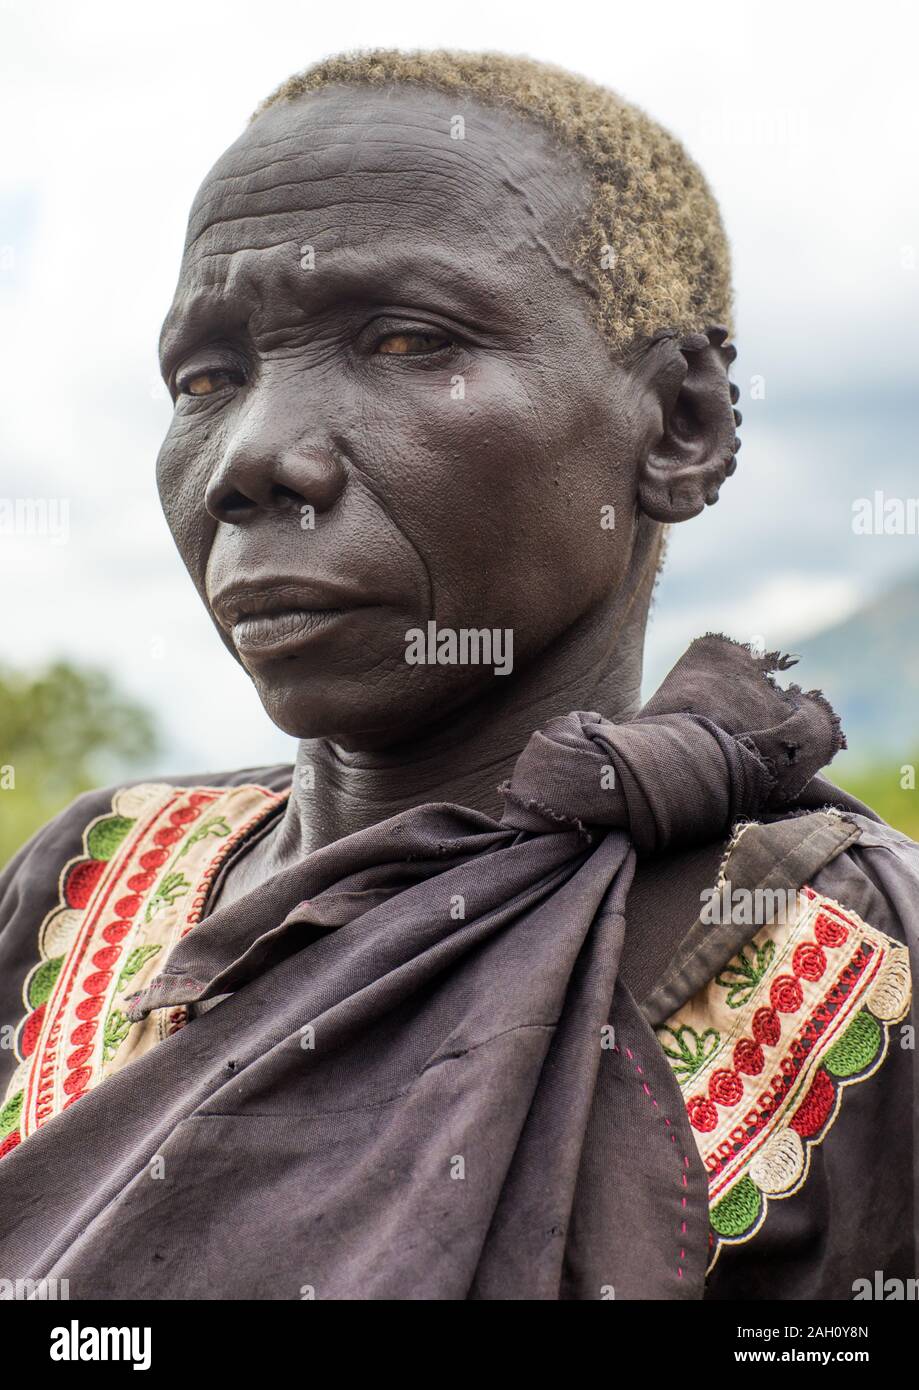 Lotuko tribe old woman with the ears cut in the same way they do to their cows as decoration, Central Equatoria, Illeu, South Sudan Stock Photo